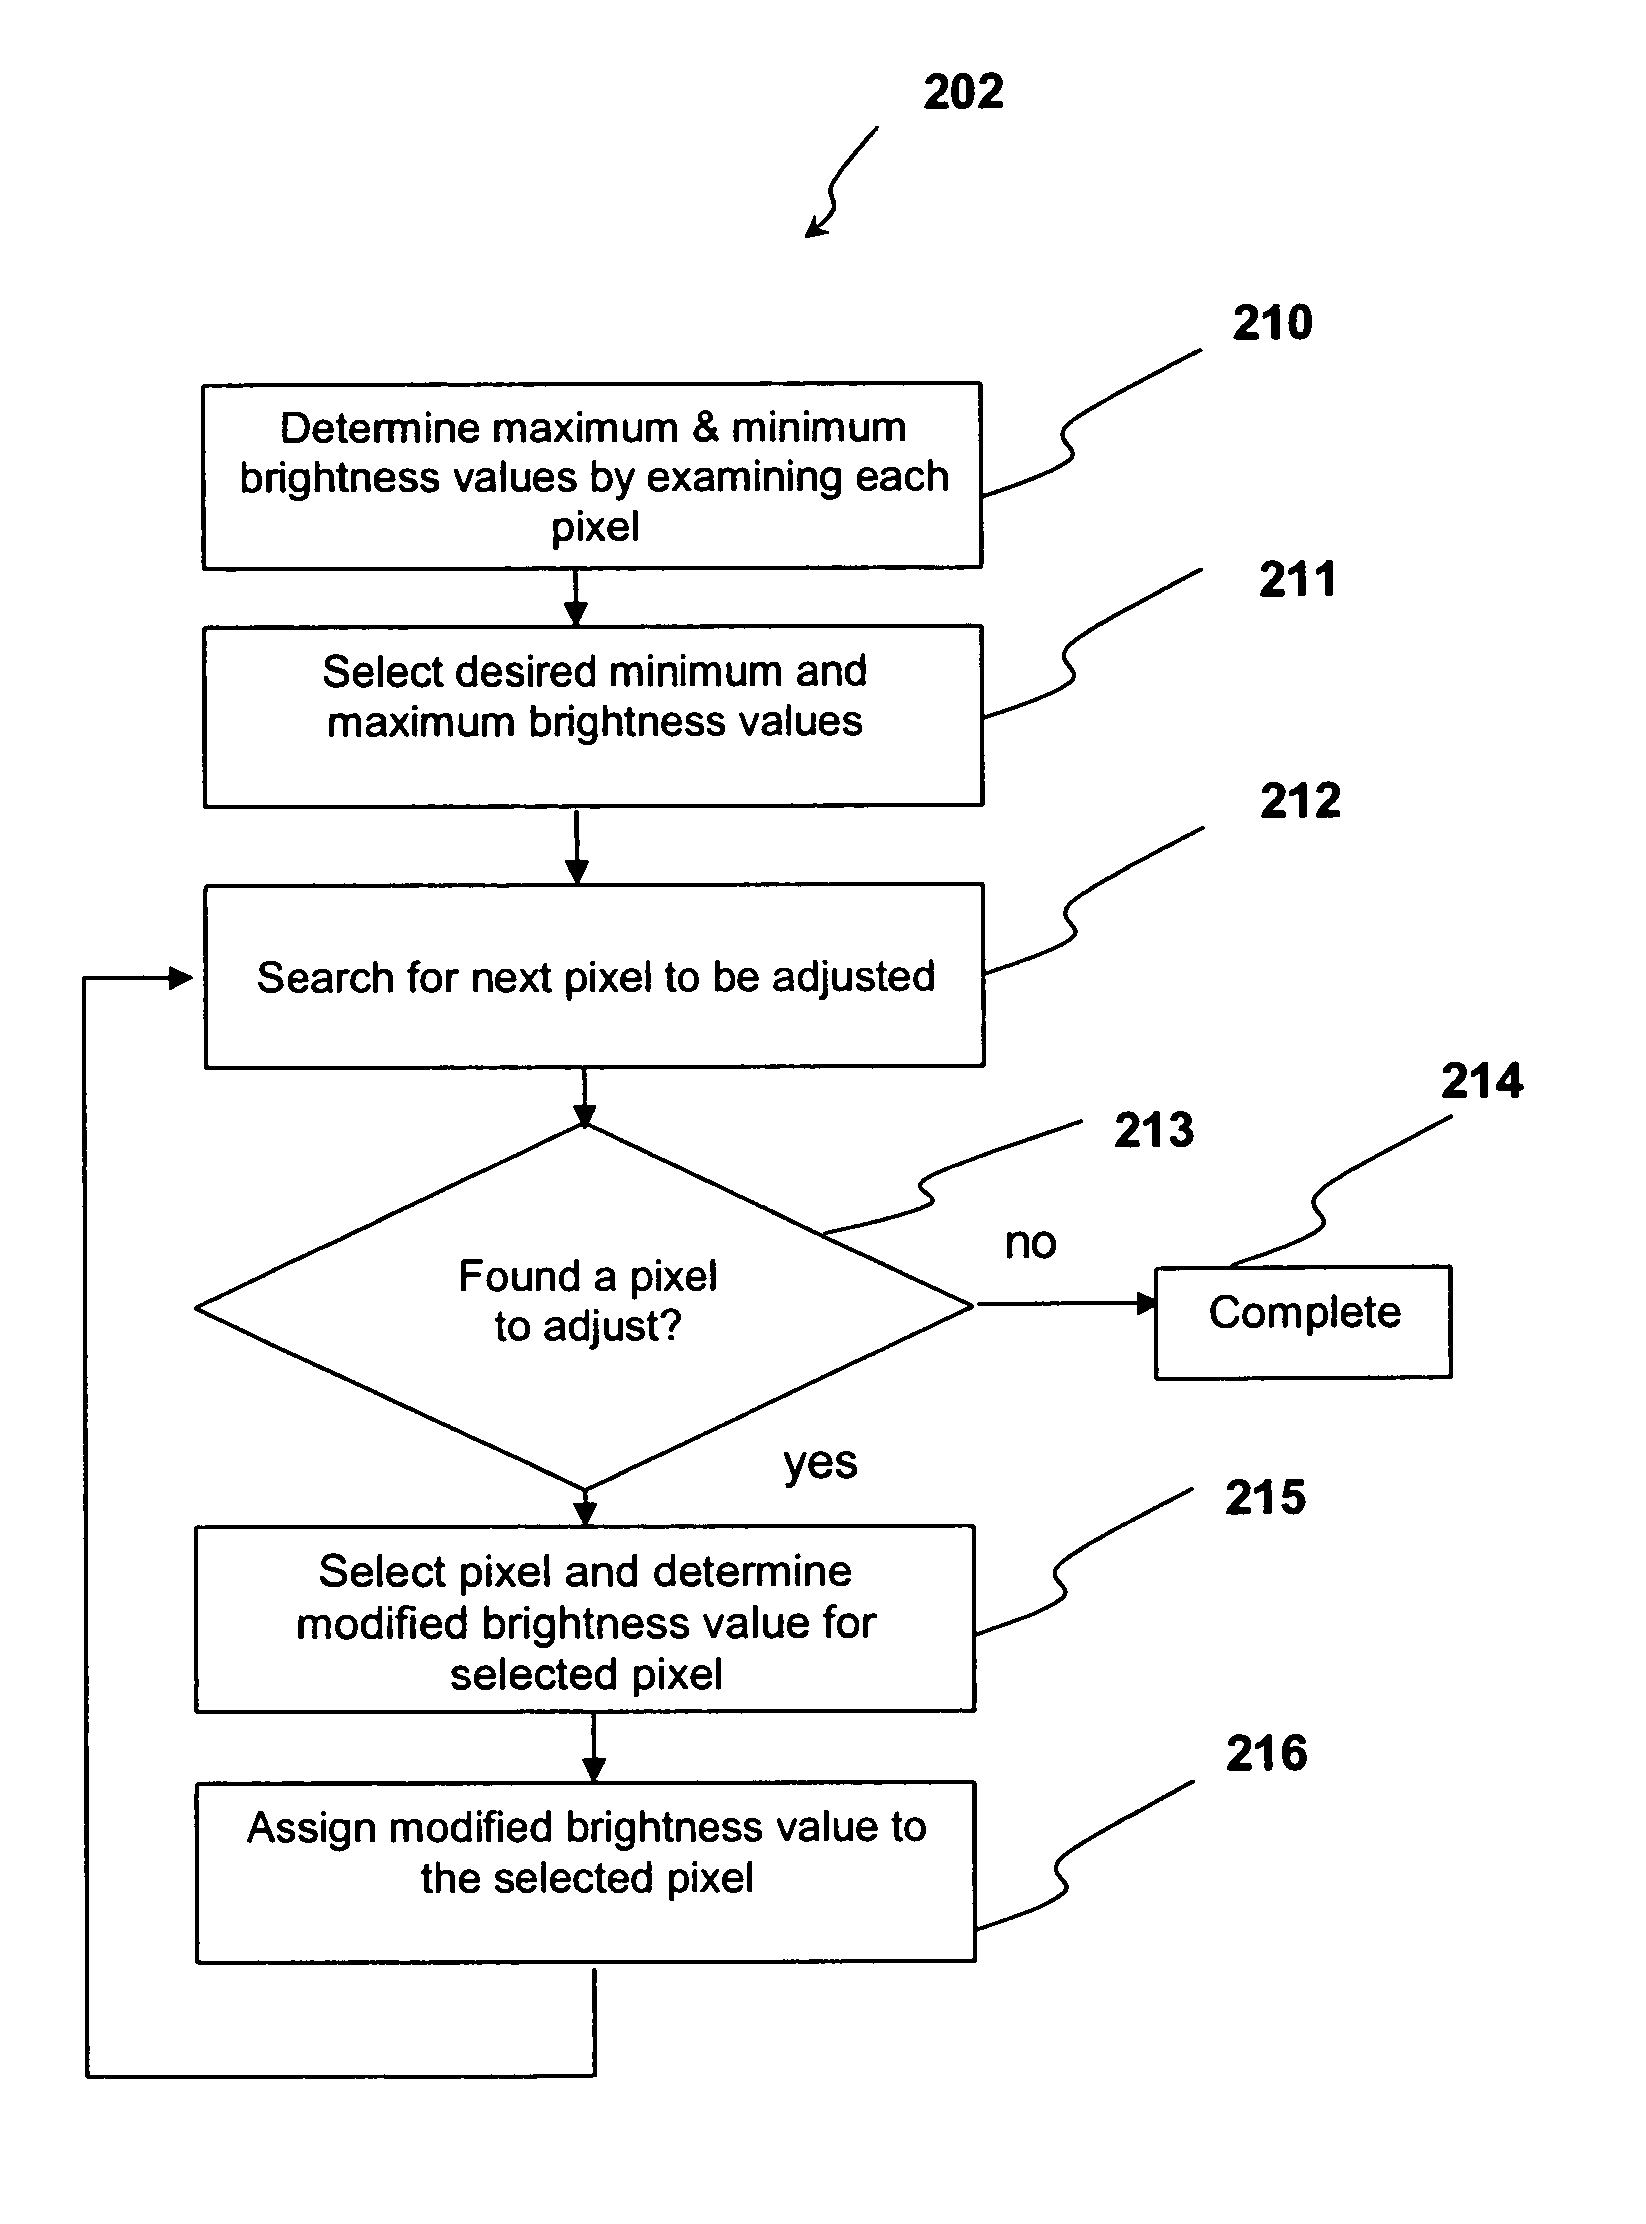 Methods and systems for automatically rendering information on a display of a building information system